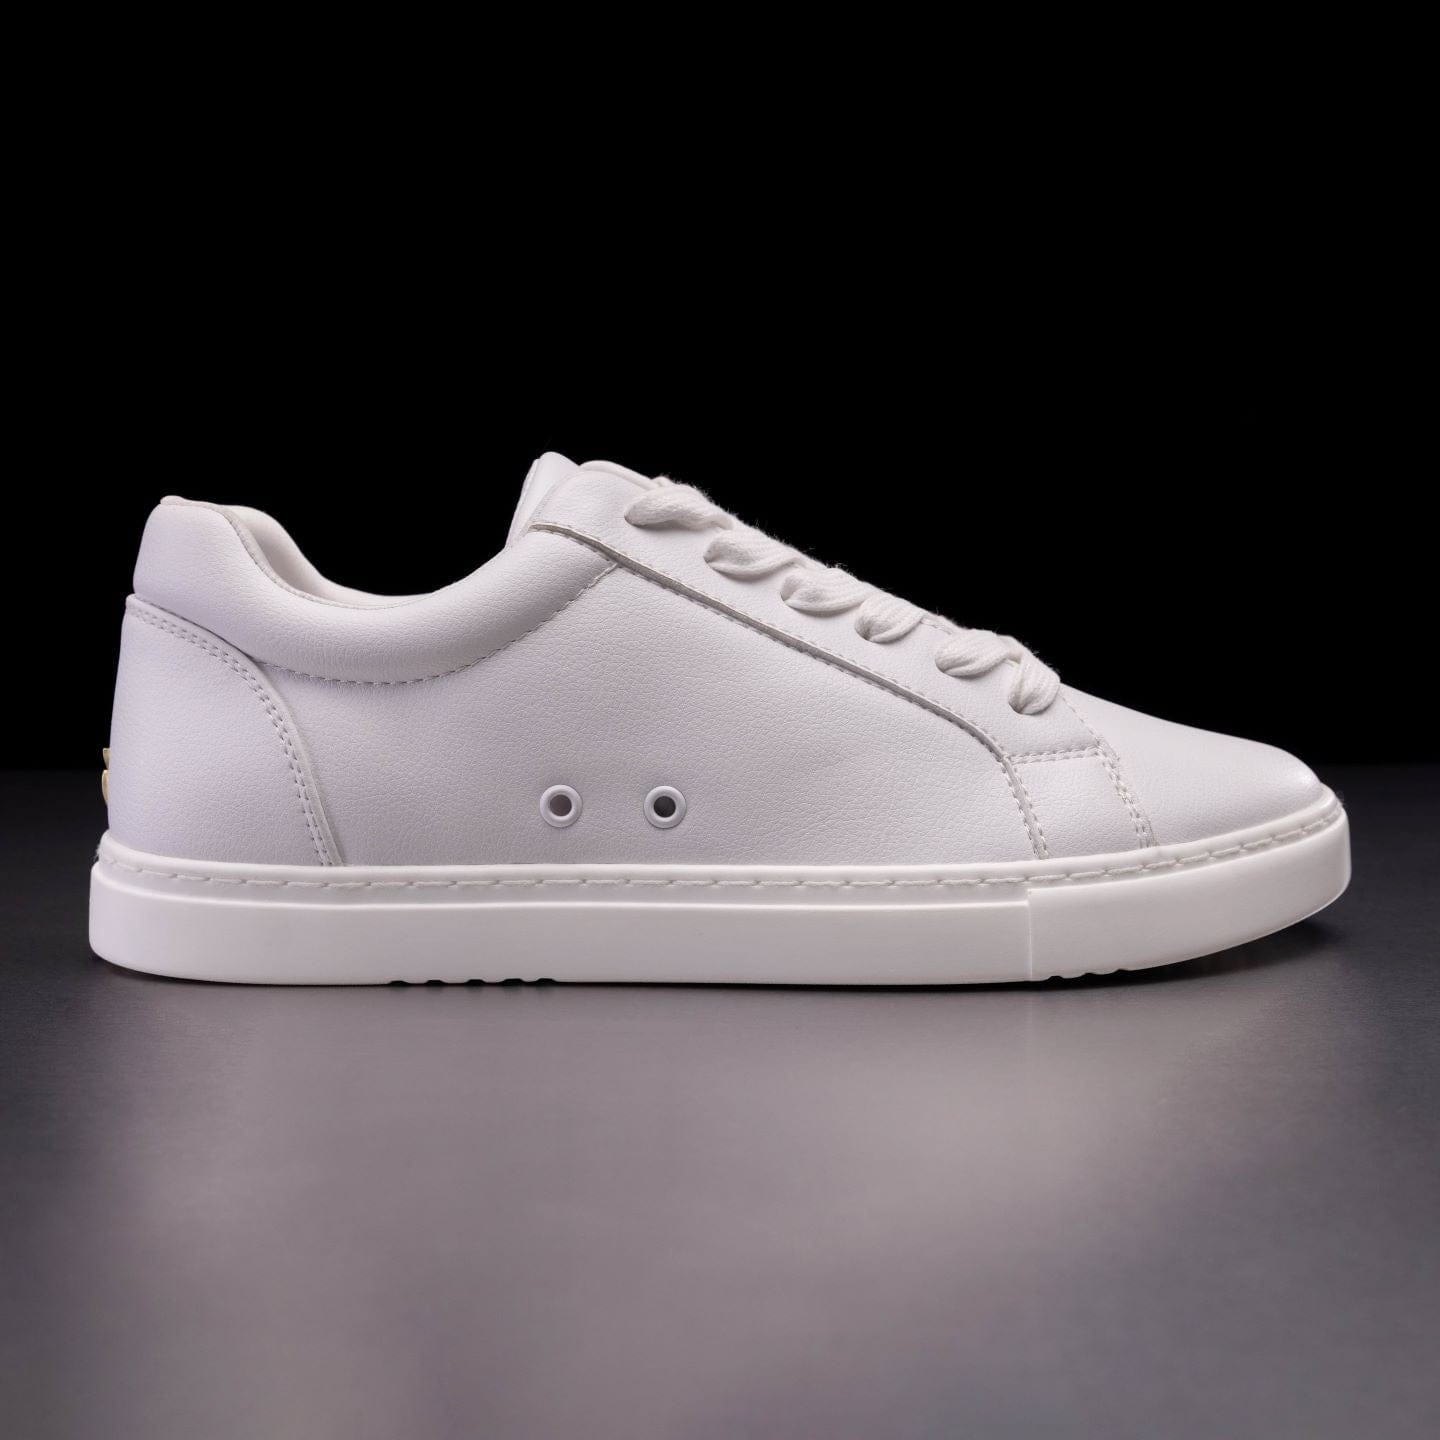 Fuego Dance Sneaker White | Low-top